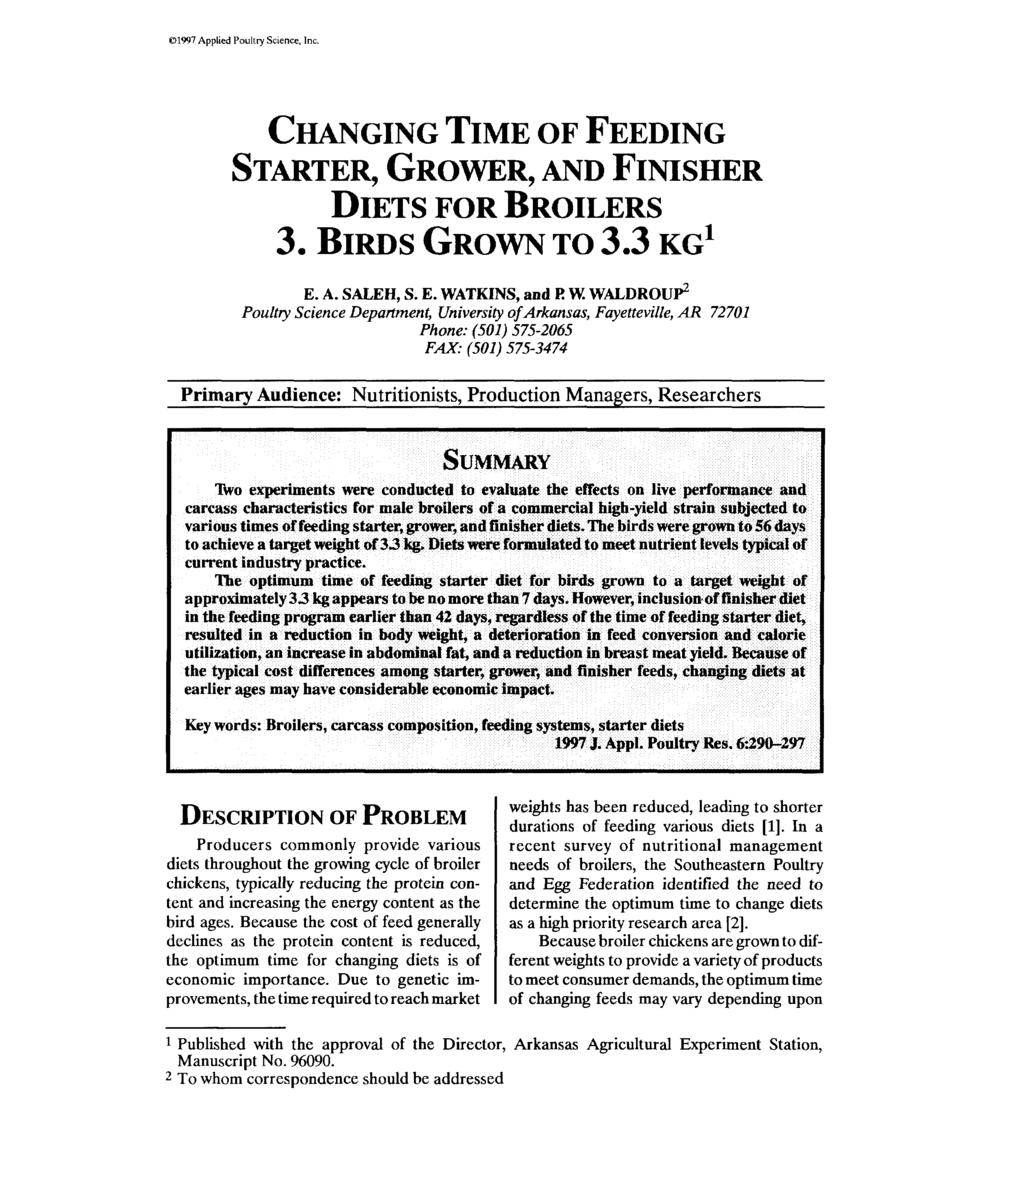 81997 Applied Poultry Science, Inc. OF FEEDING AND FINISHER DIETS FOR BROILERS 3. BIRDS GROWN TO 3.3 KG' CHANGING TIME